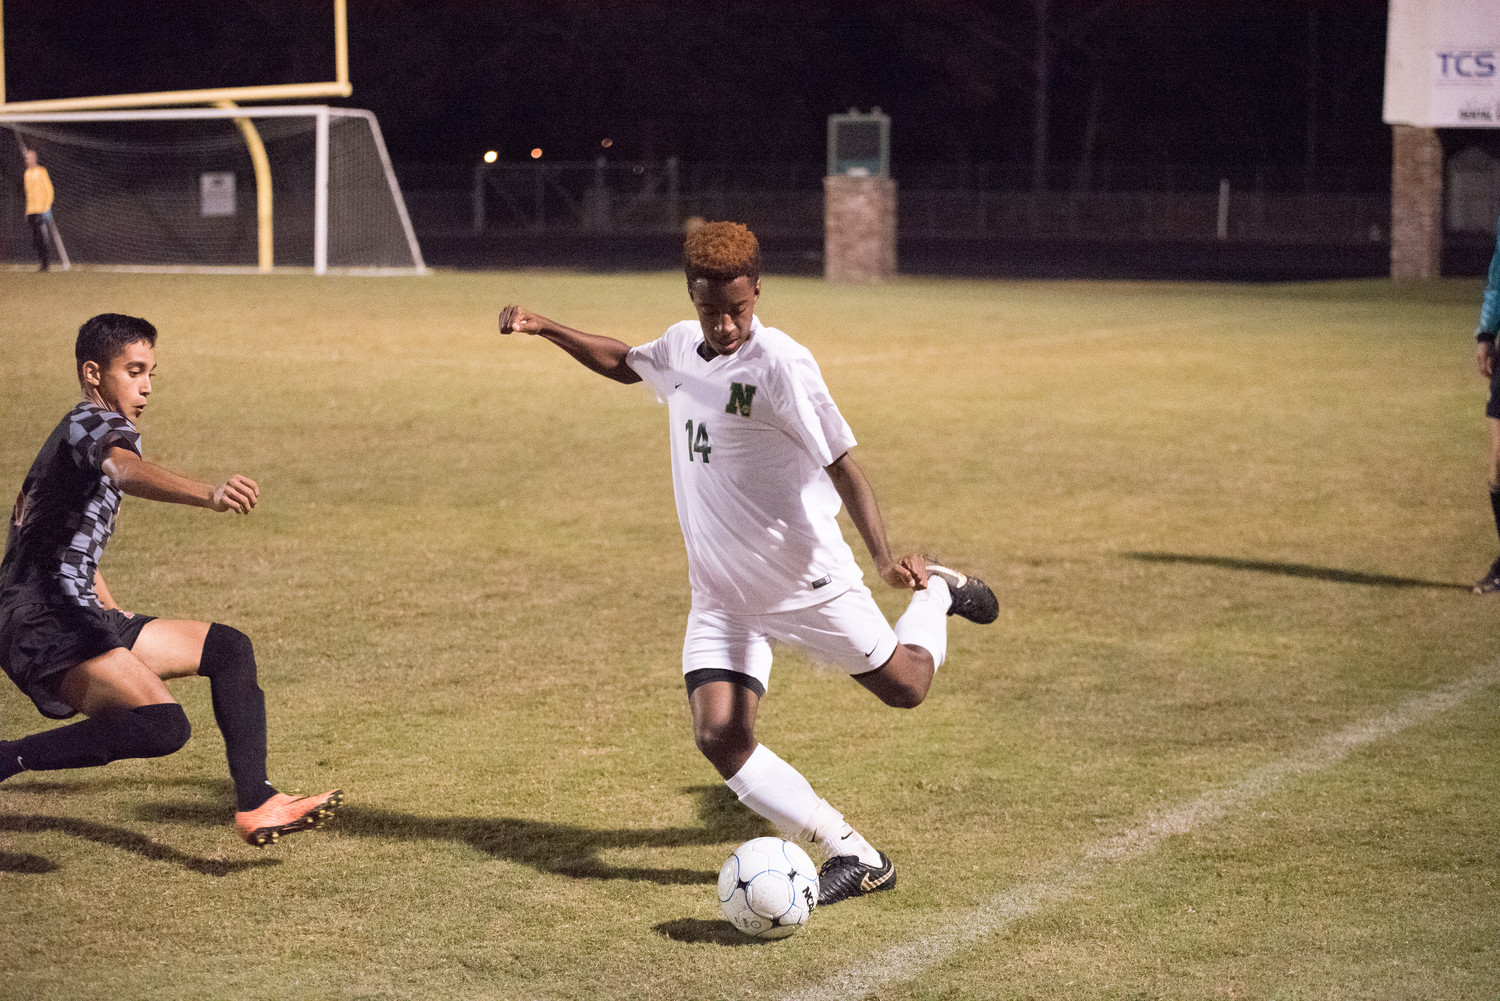 Nease’s Akil Springette (14) kicks the ball during the Nov. 29 victory.